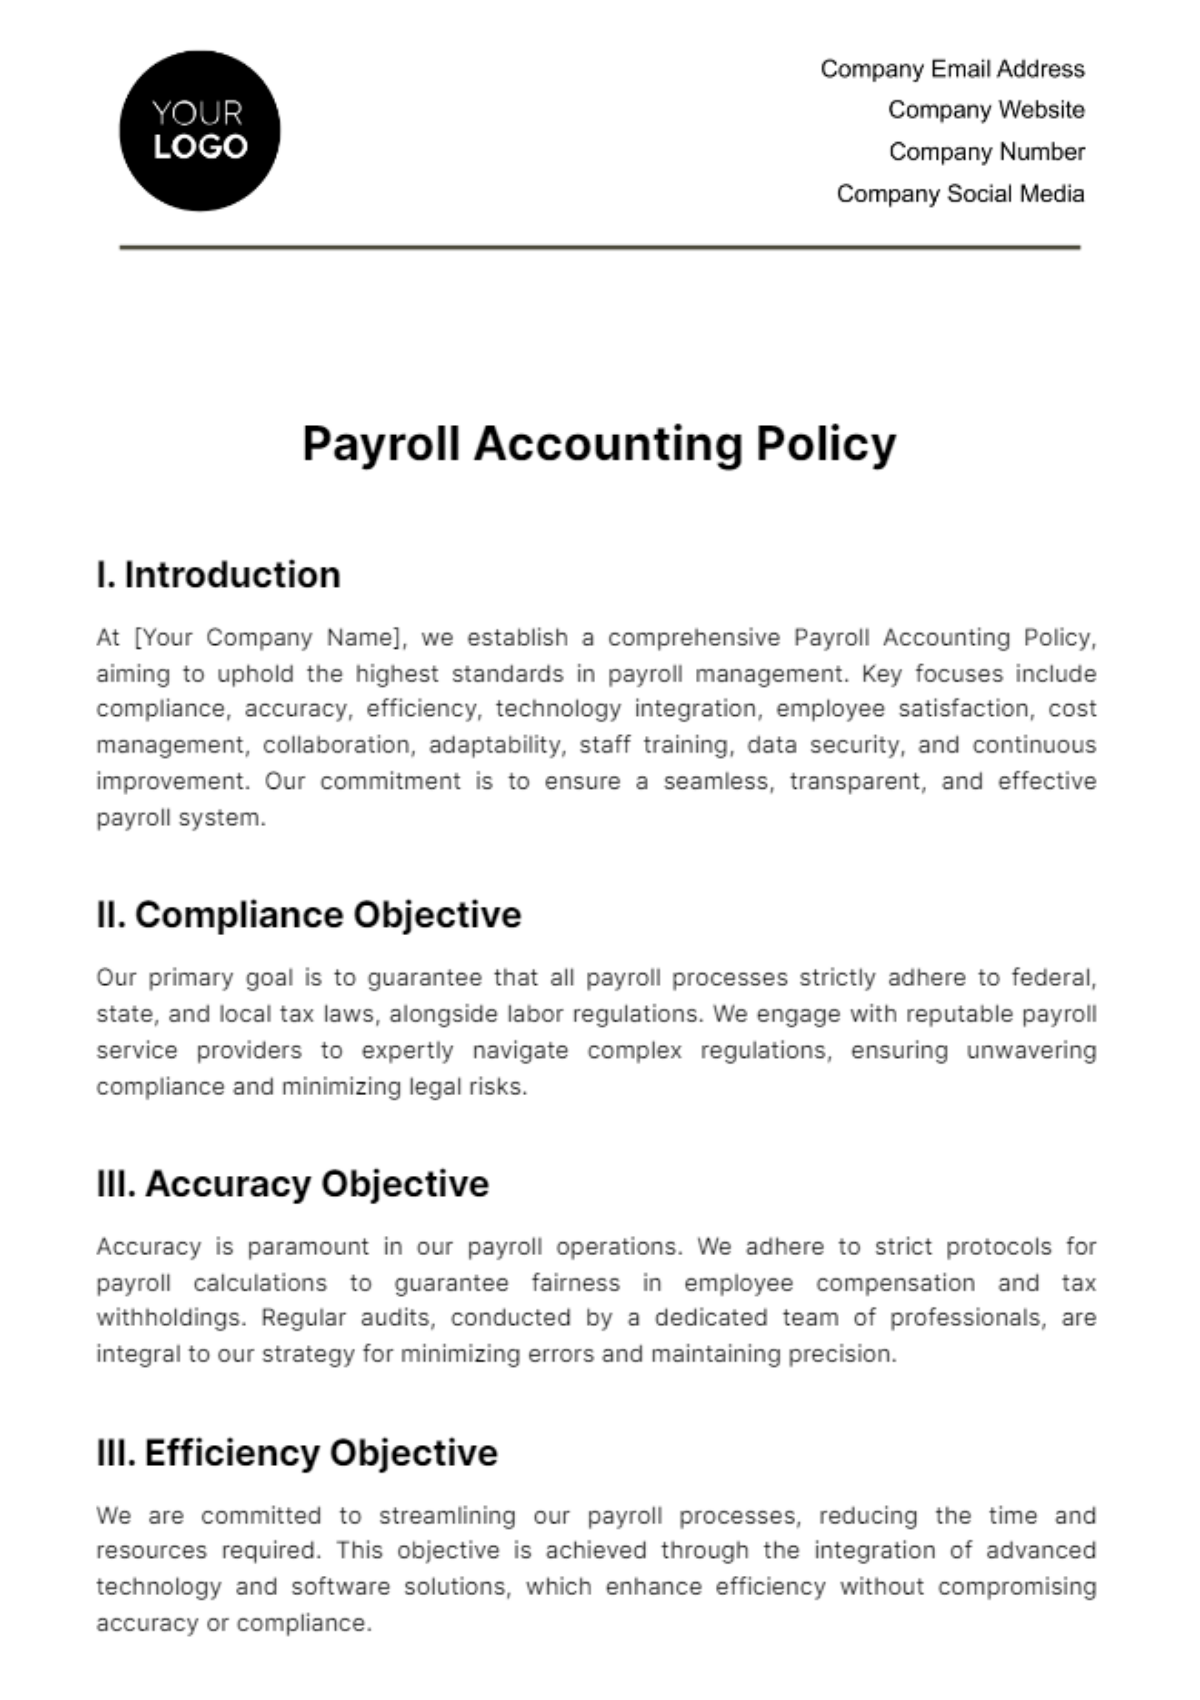 Payroll Accounting Policy Template